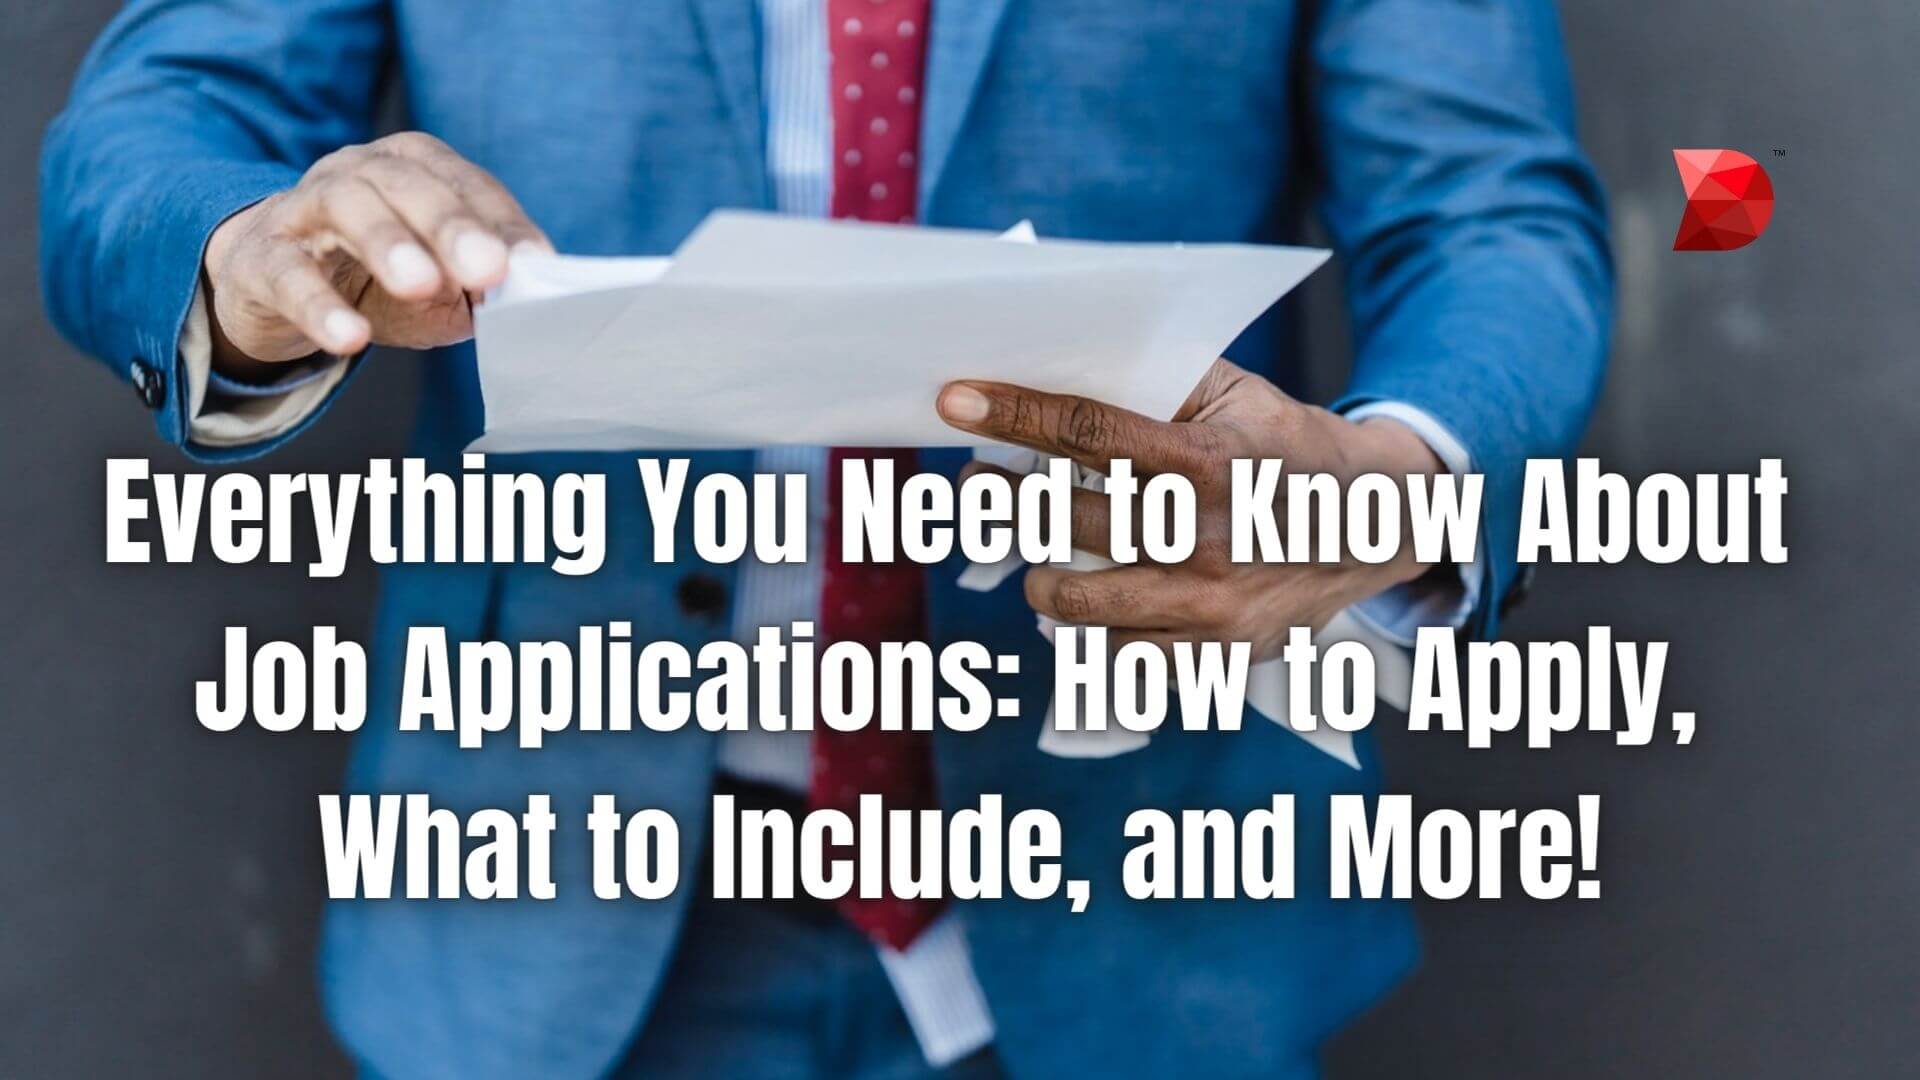 Everything You Need to Know About Job Applications How to Apply, What to Include, and More!